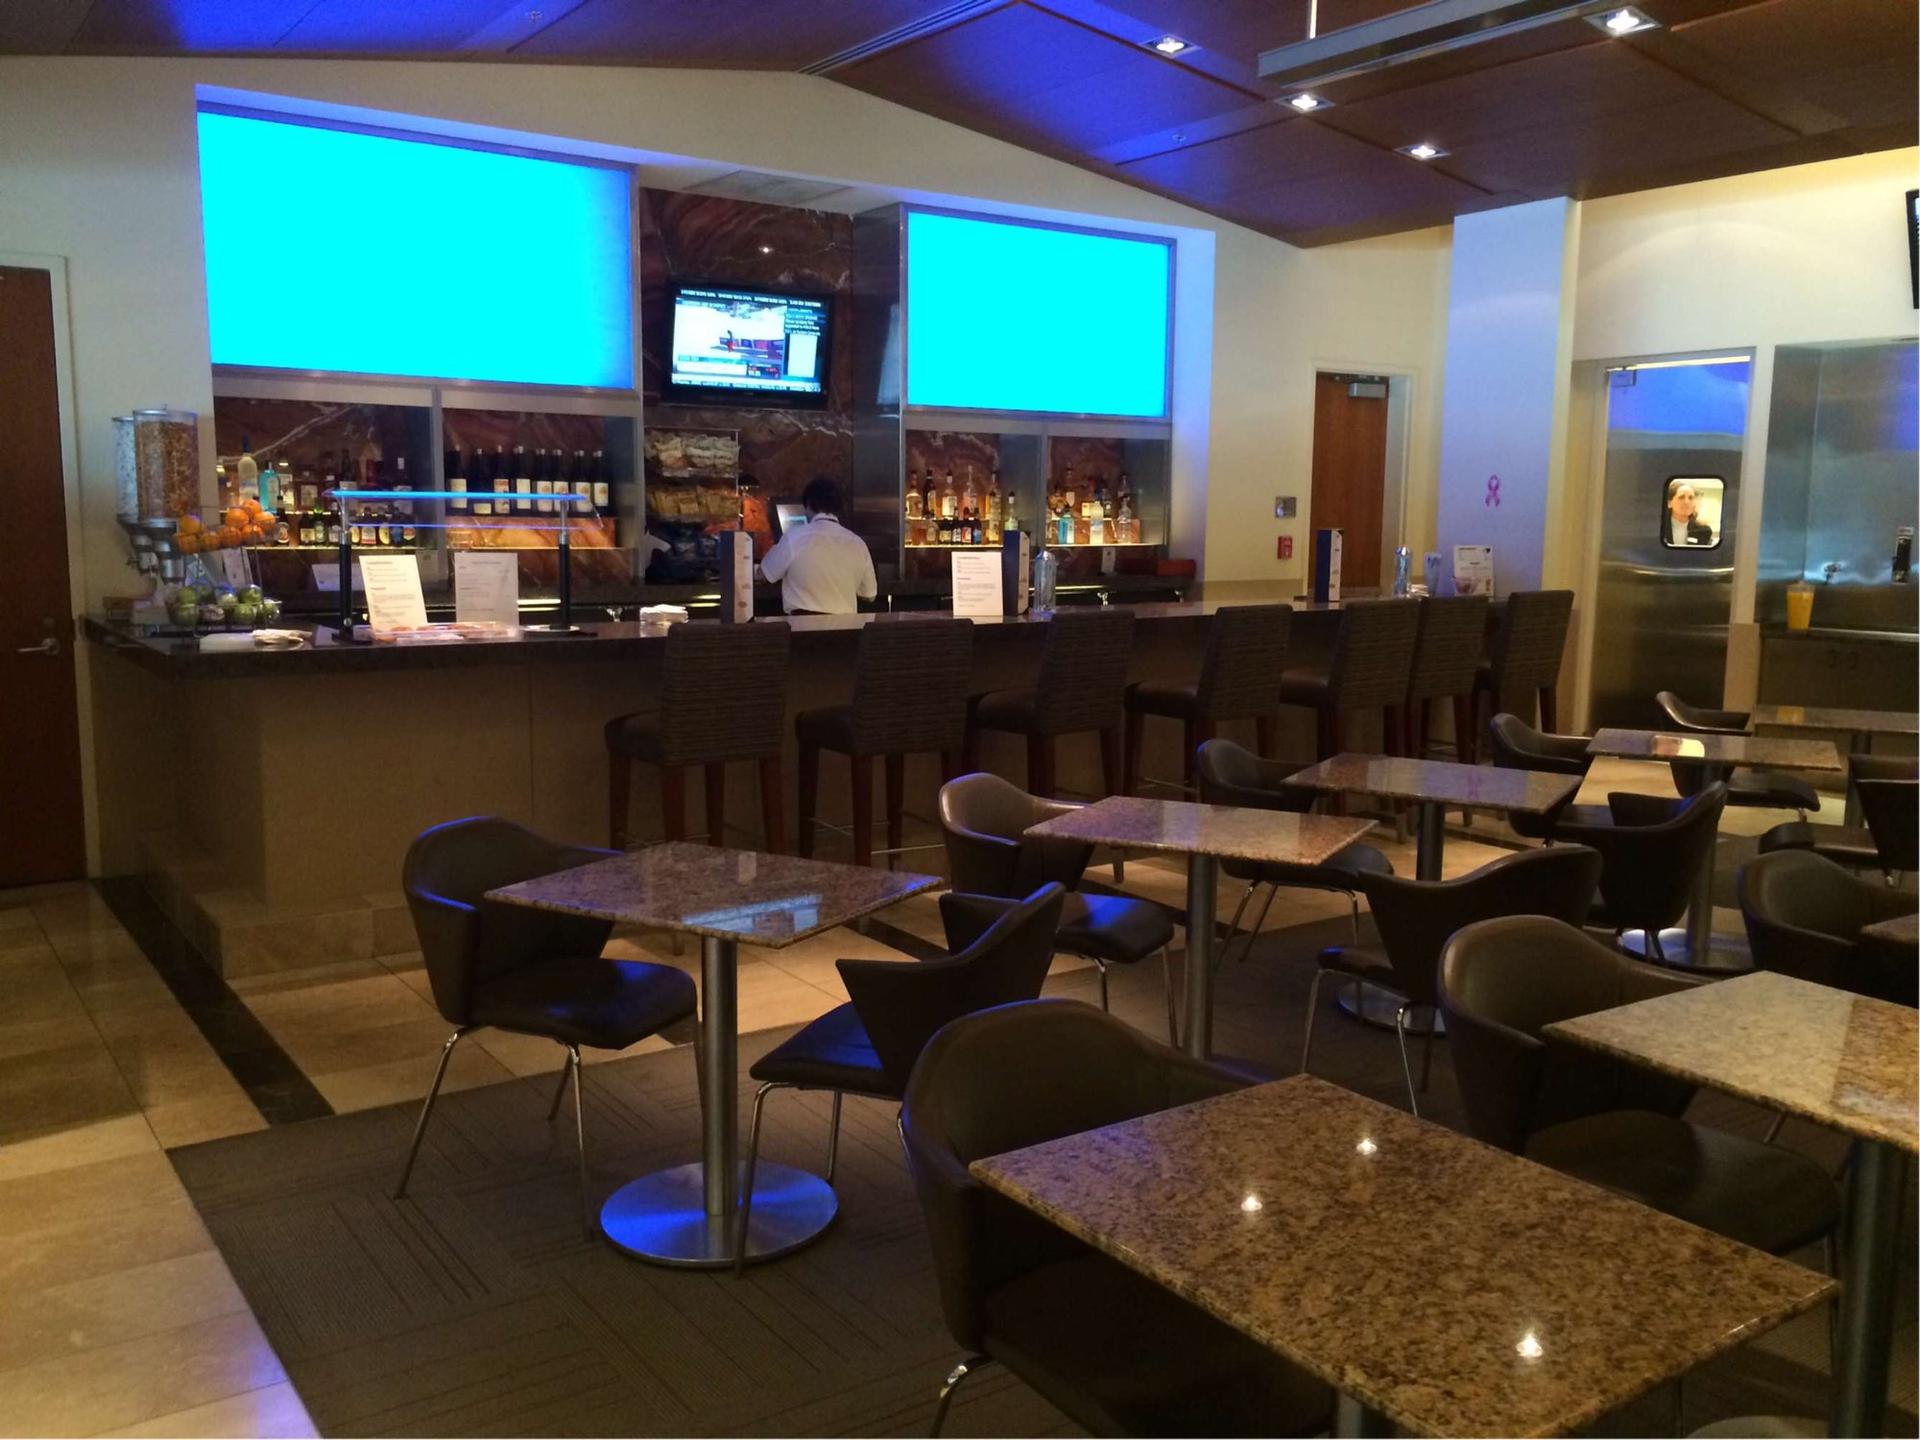 American Airlines Admirals Club image 3 of 31